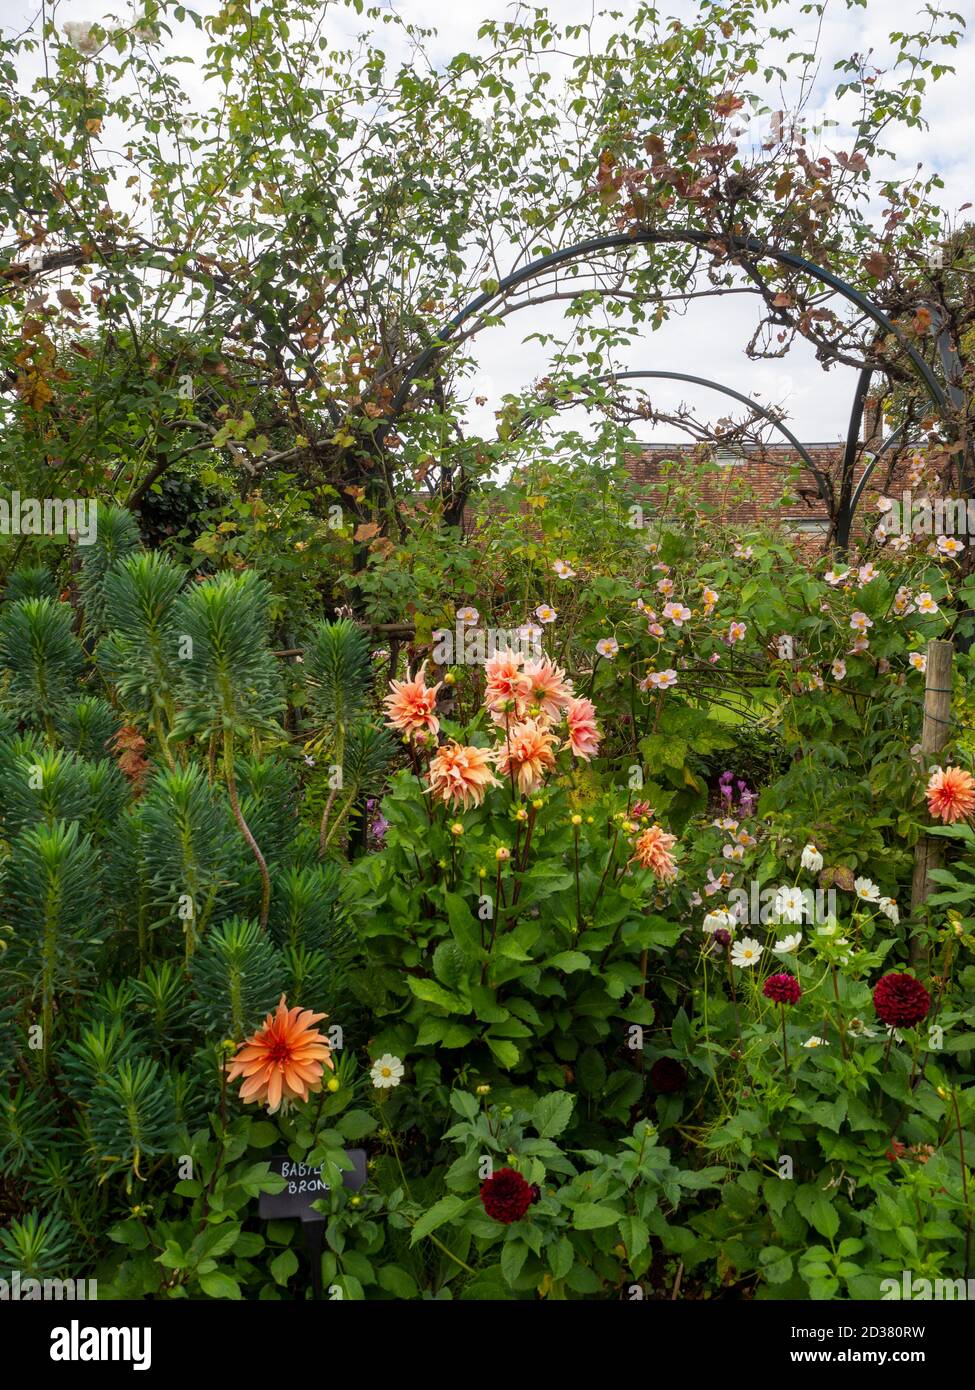 Chenies Manor gardens in September. Climbing rose on the arches with Anemone Japonica, Dahlia 'Labyrinth' and Dahlia 'Babylon Brons', white daisies. Stock Photo